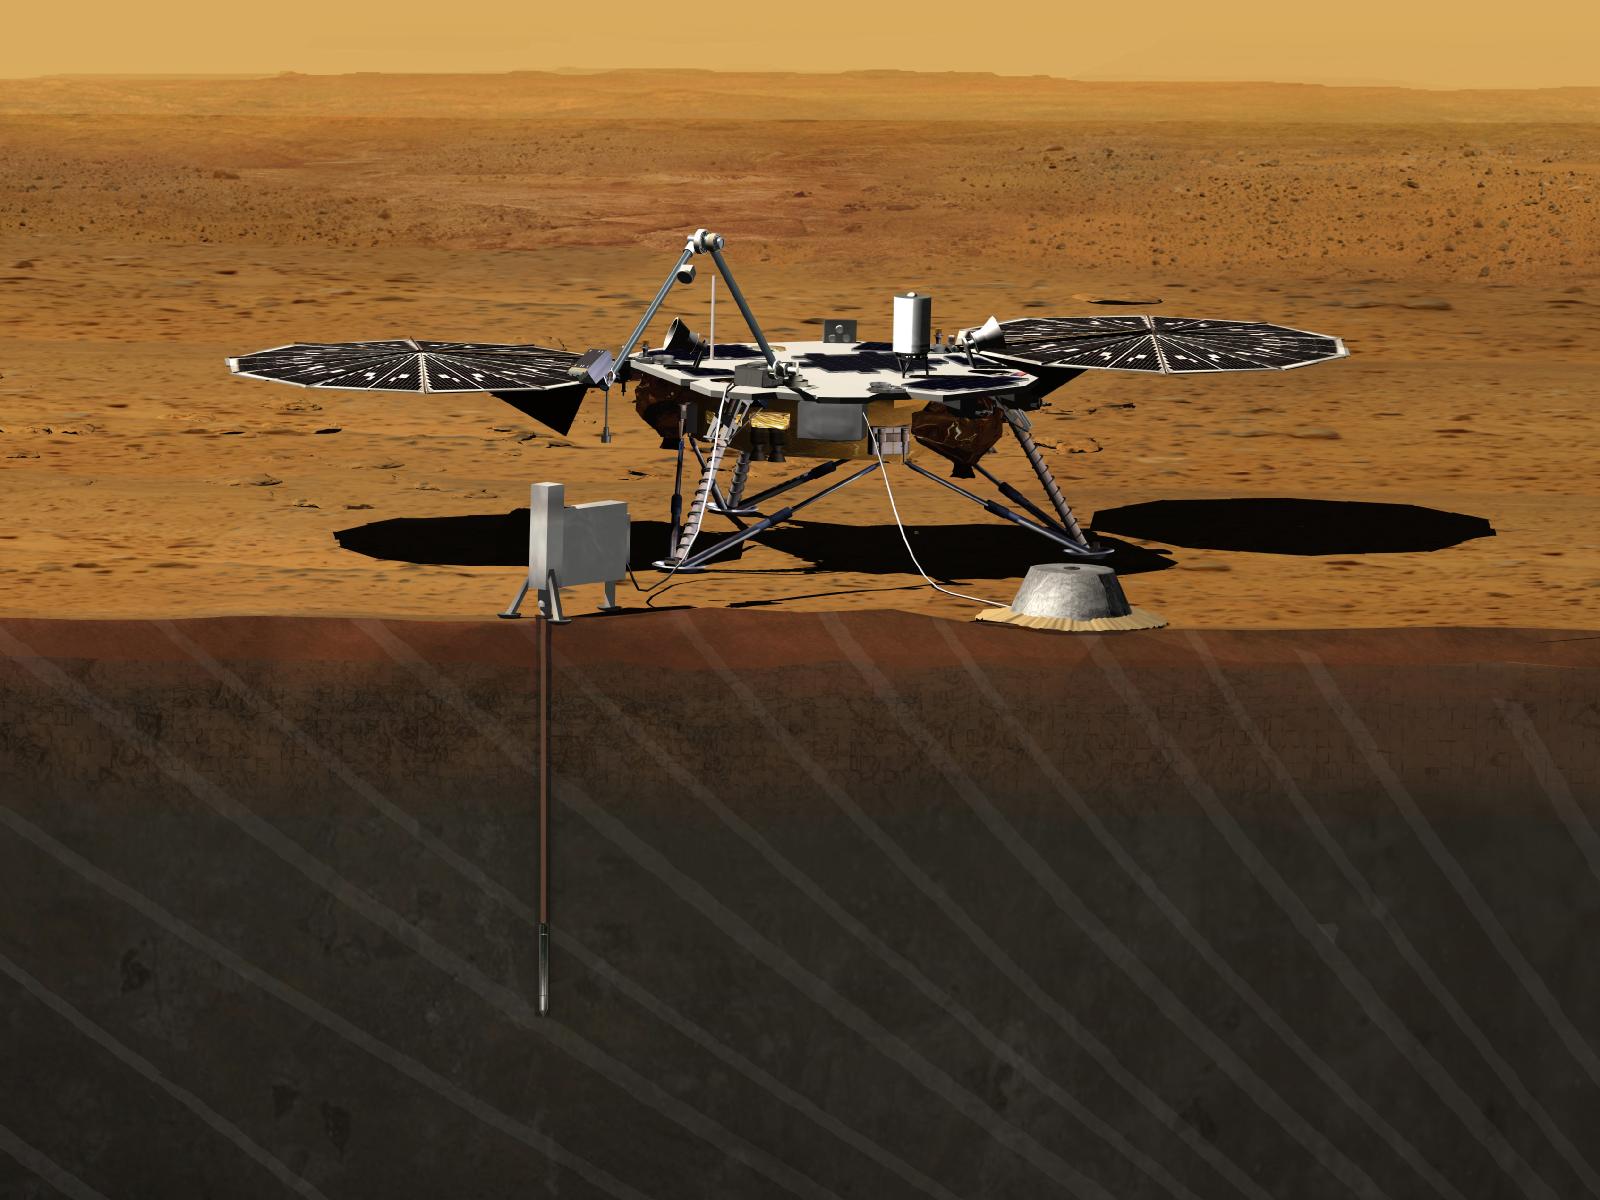 The InSight mission to study Mars' interior will be the next Discovery mission, in 2016. Image Credit: NASA/JPL-Caltech